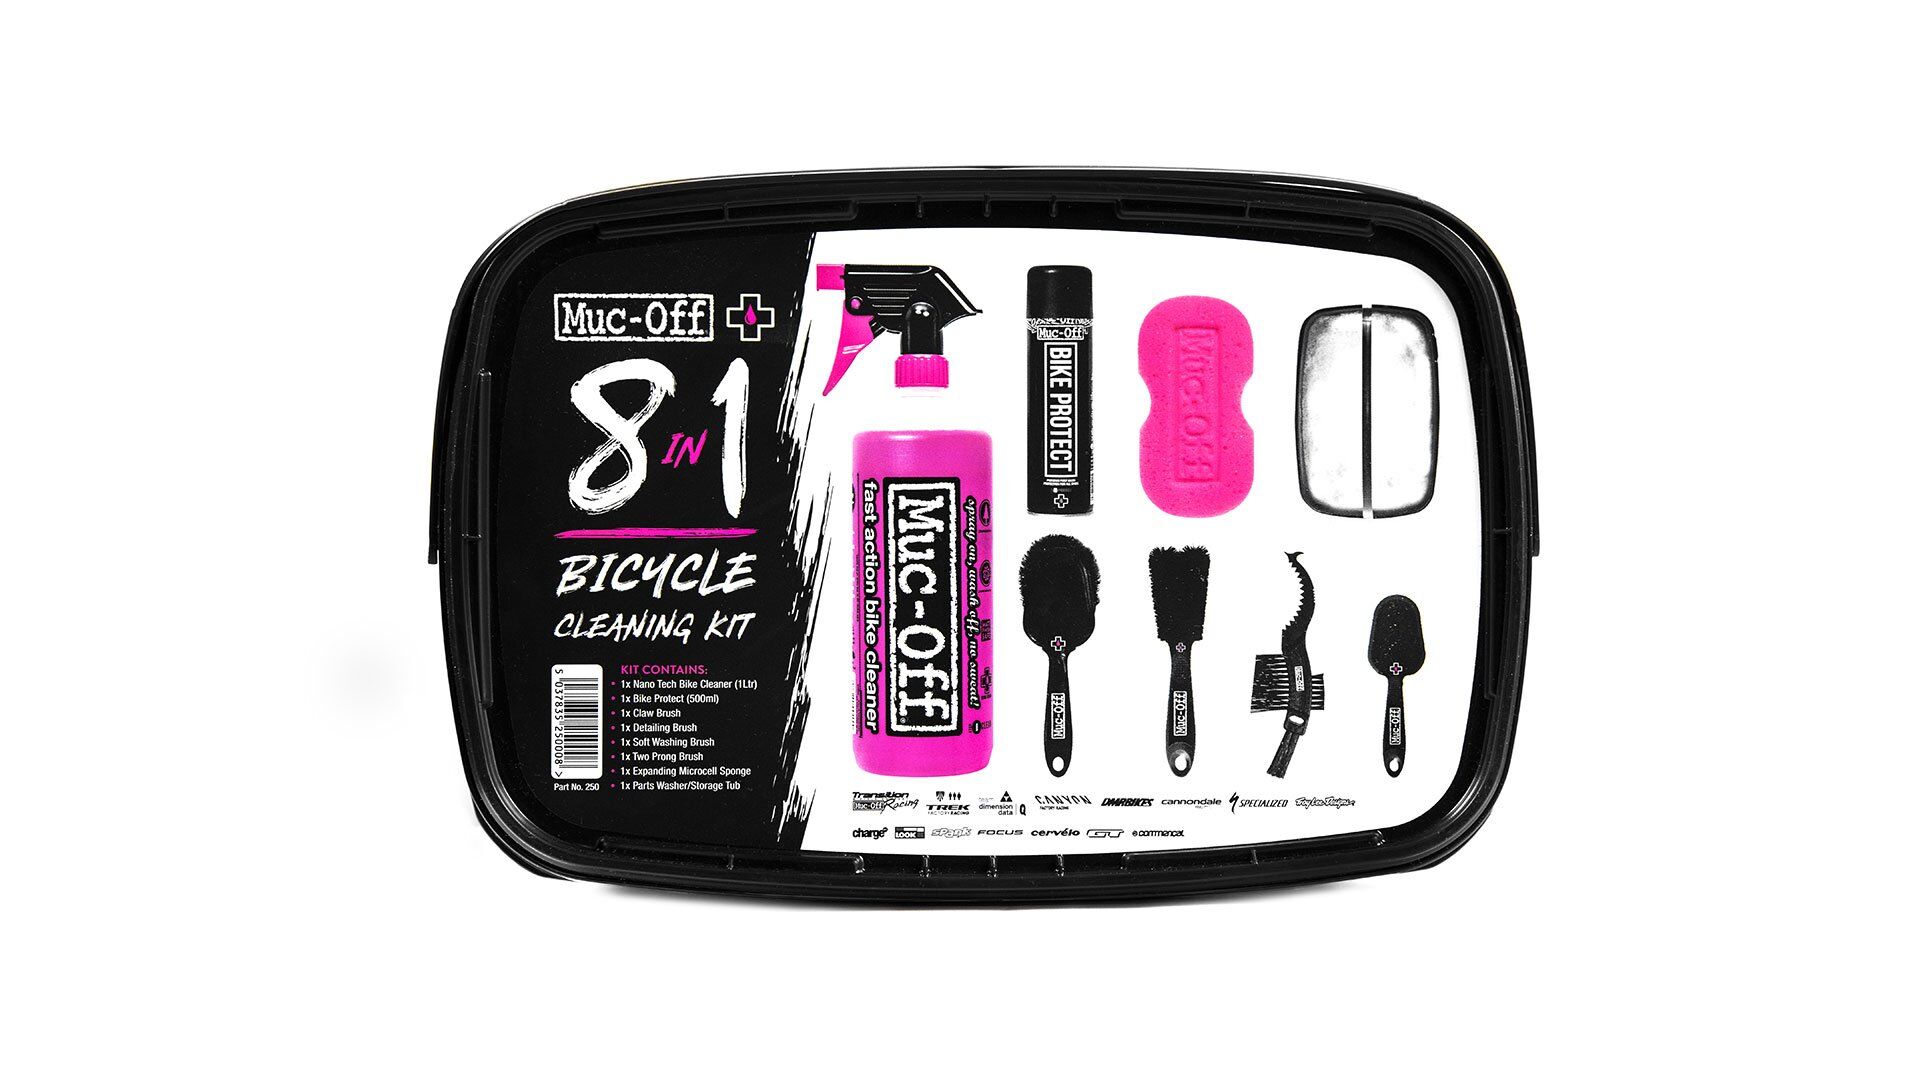 Muc-Off 8 In 1 Bicycle Cleaning Kit - Kit mantenimiento bicicleta